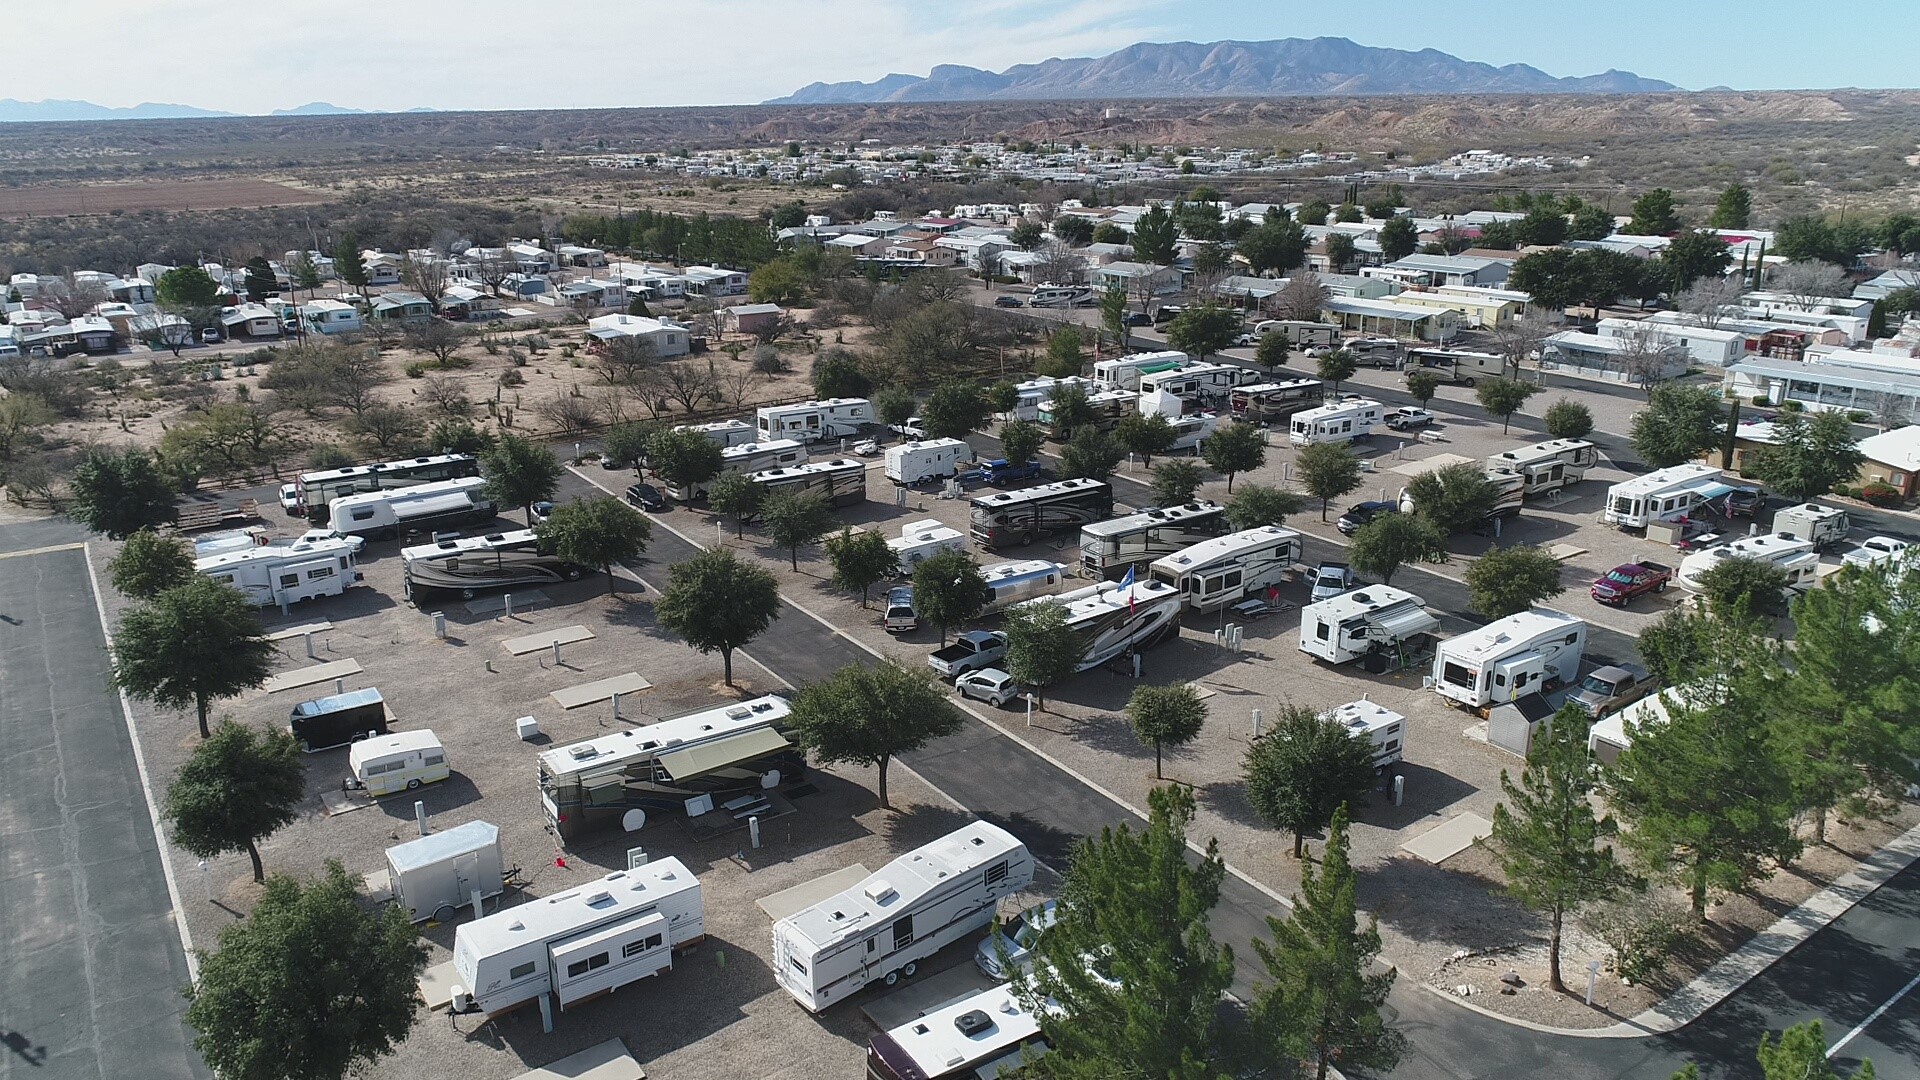 Aerial shot of campground's trailers and motorhomes